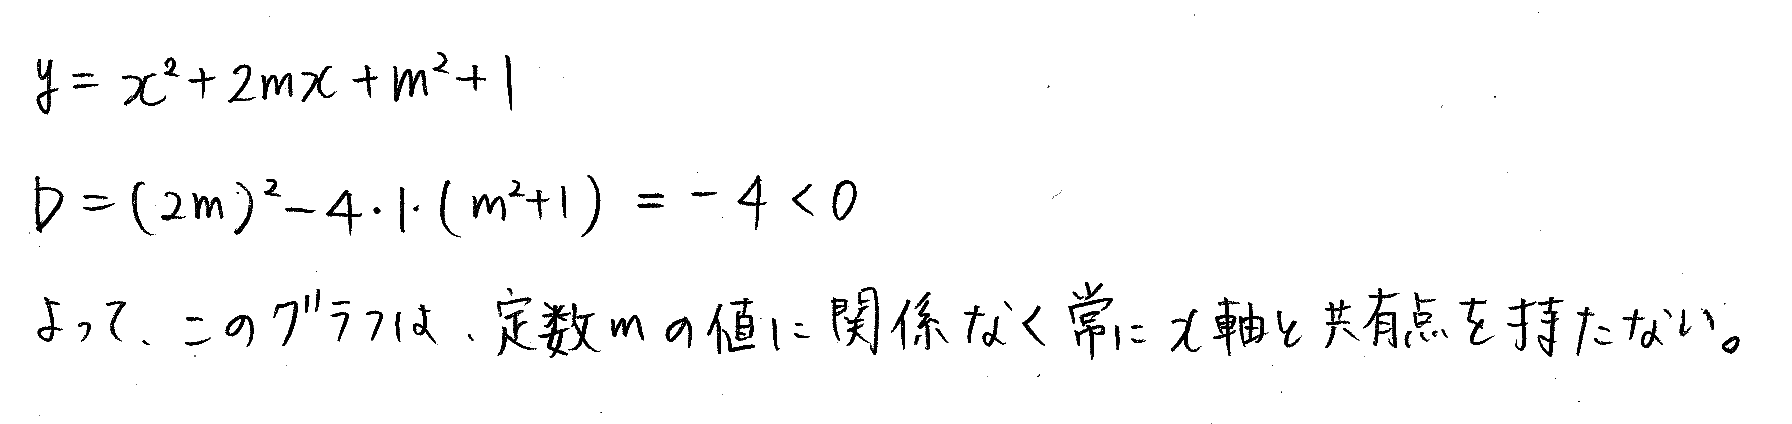 clear数学Ⅰ-239解答 